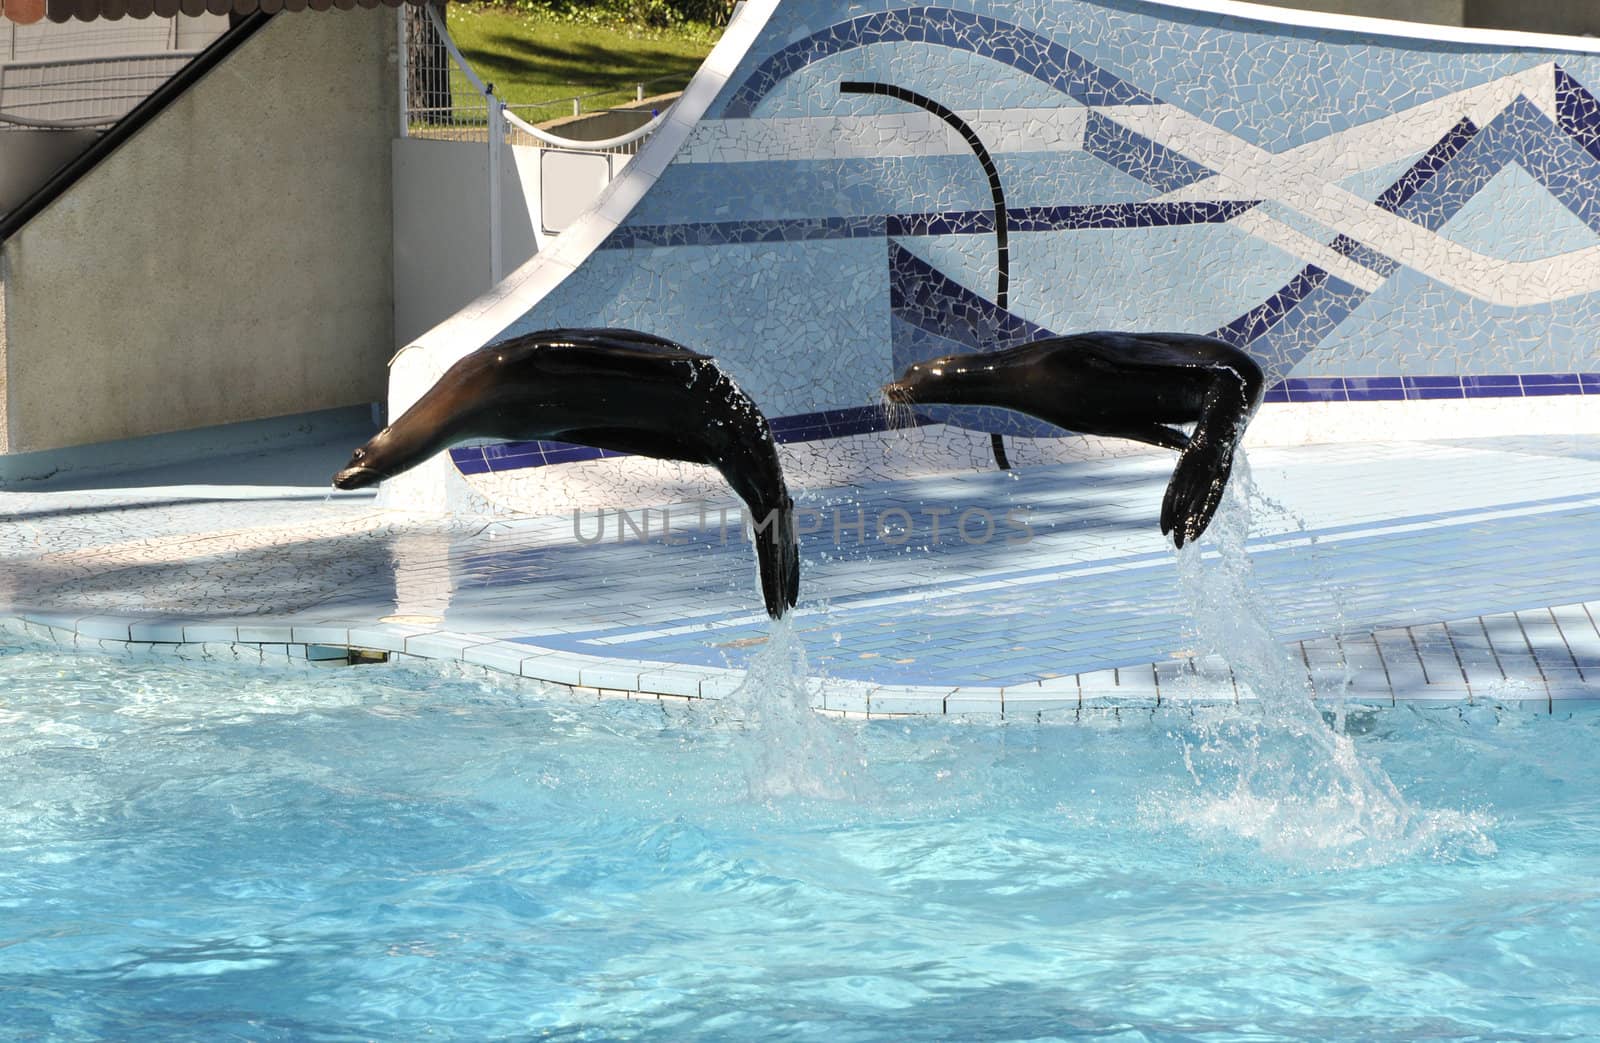 Two Sea Lion Jumping Above a blue Zoo Pool